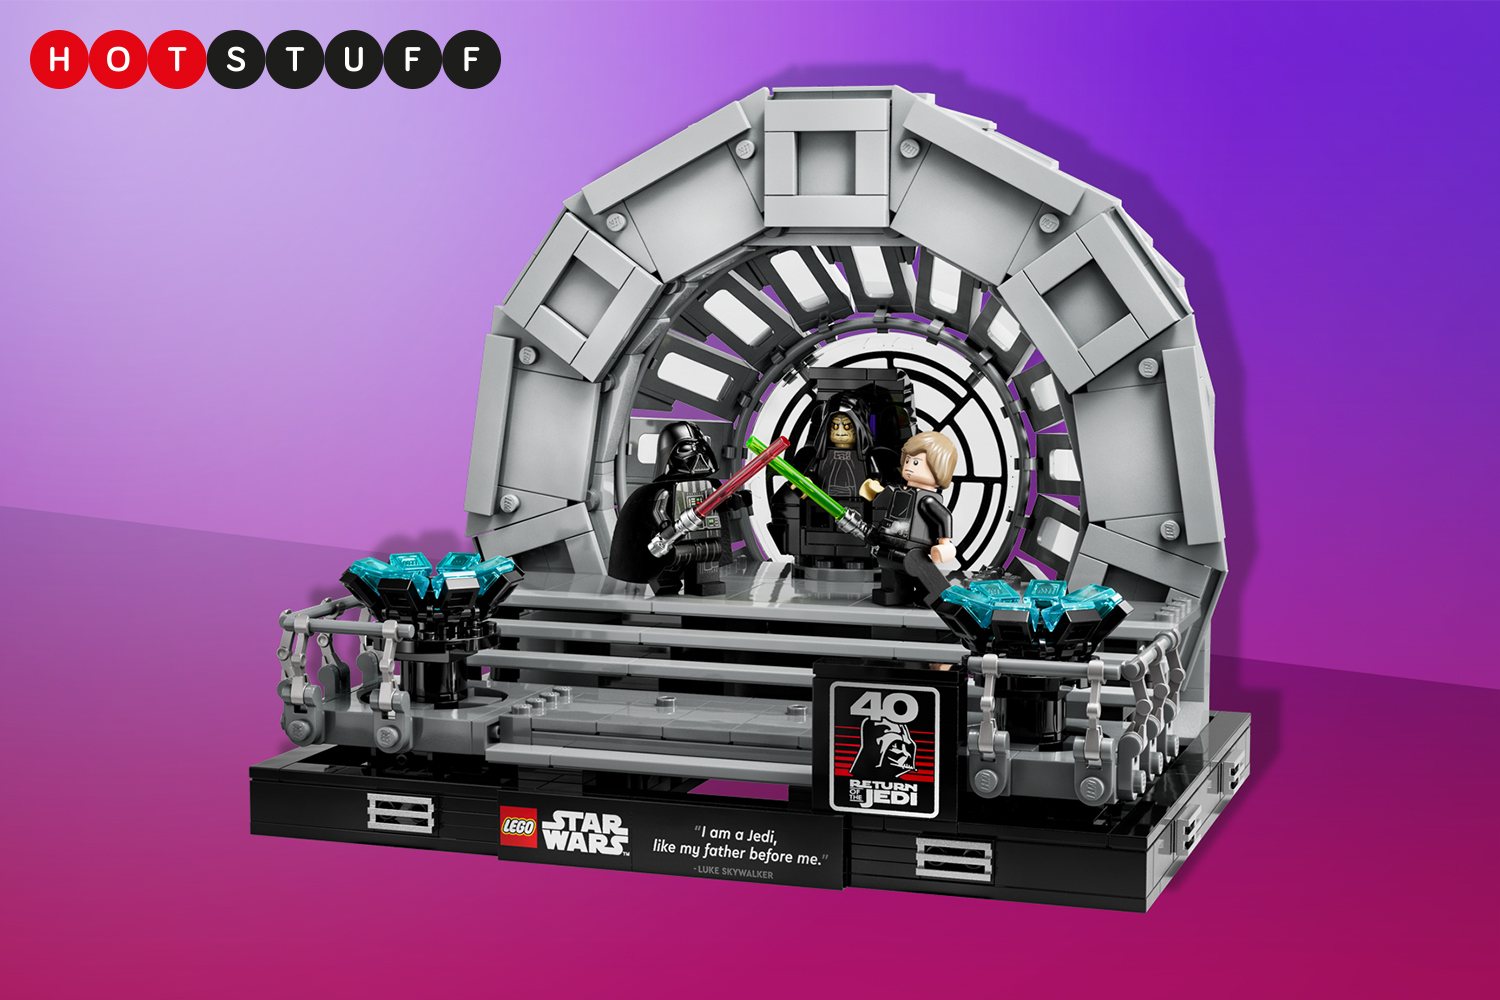 New LEGO Star Wars Return of the Jedi Dioramas Are Up for Preorder